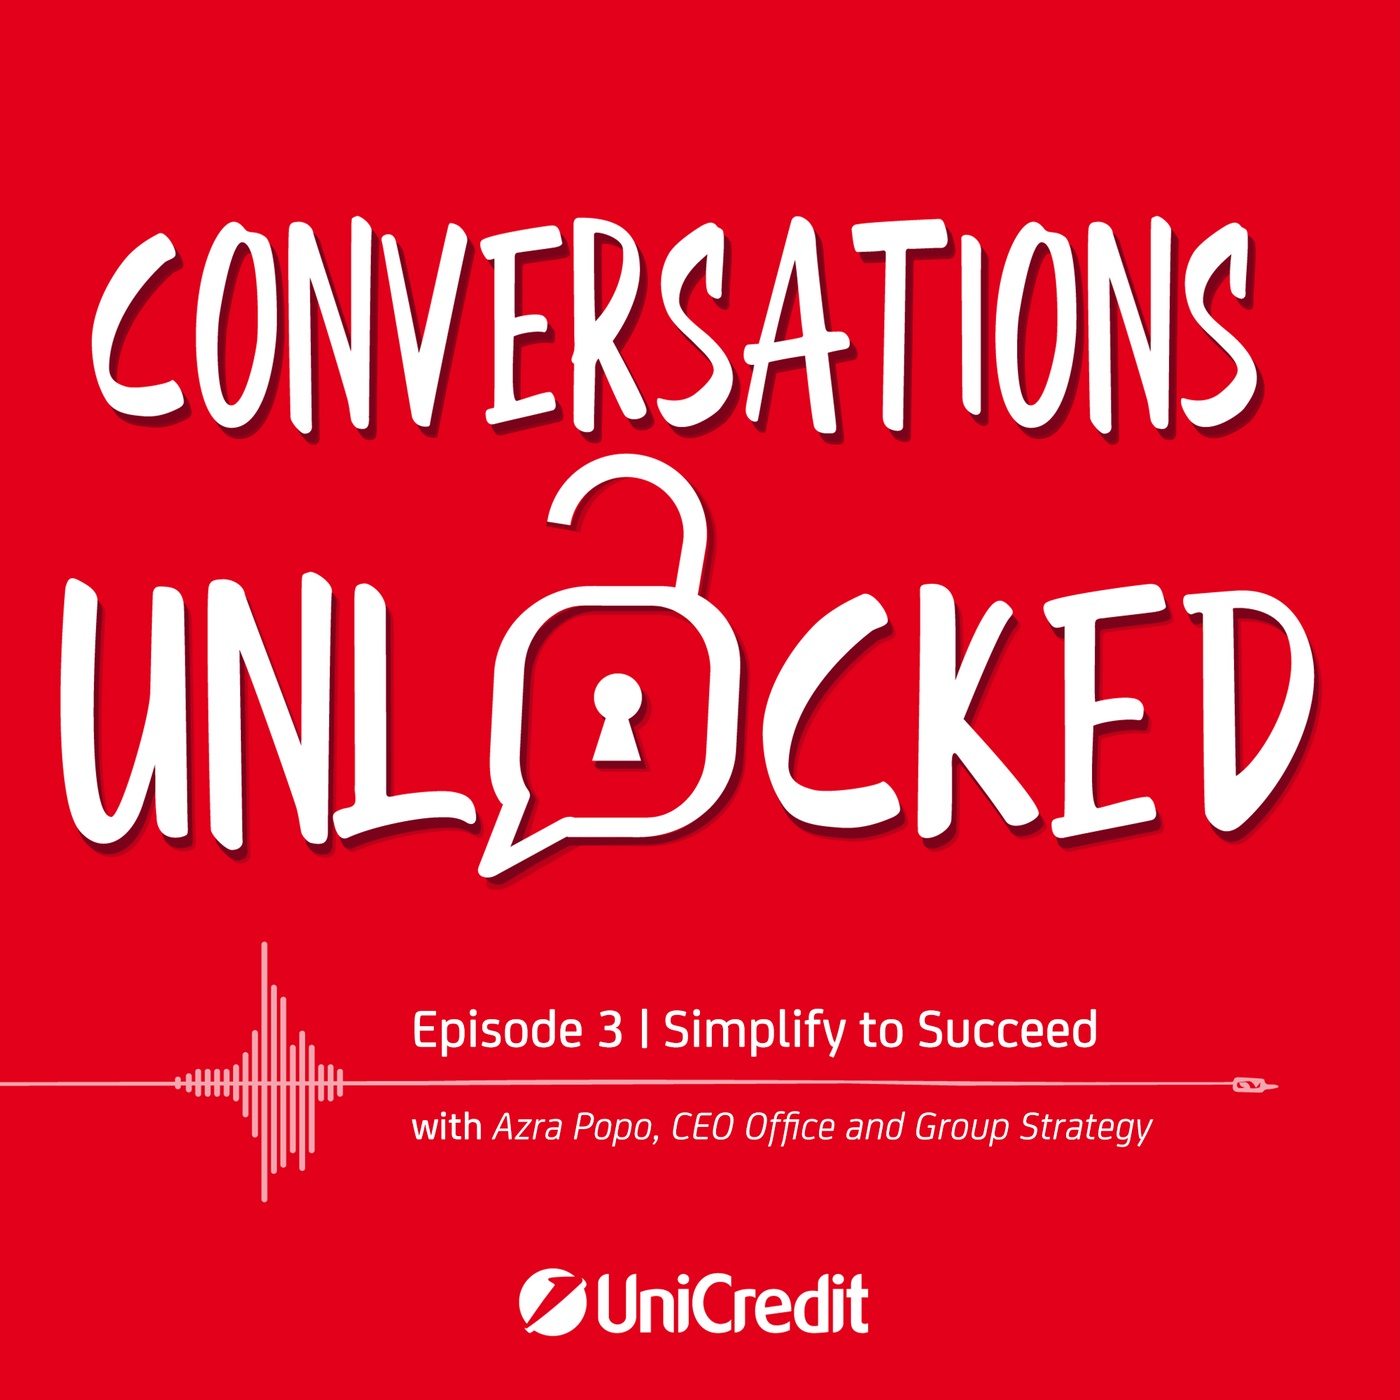 Episode 3 | Simplify to Succeed